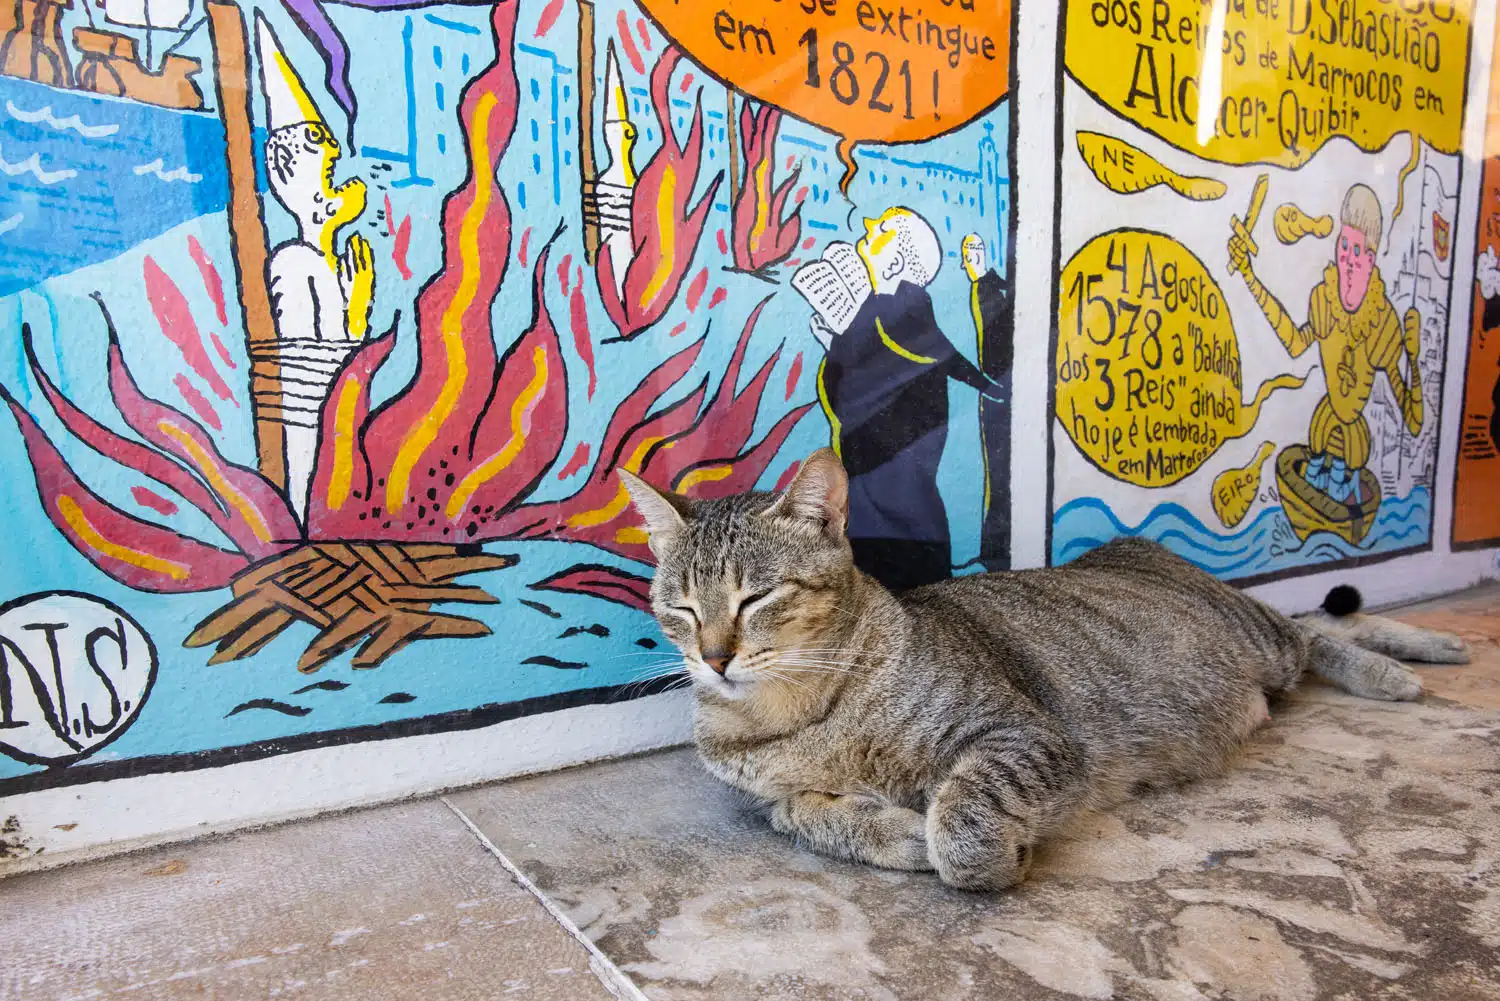 History of Lisbon Mural and Cat